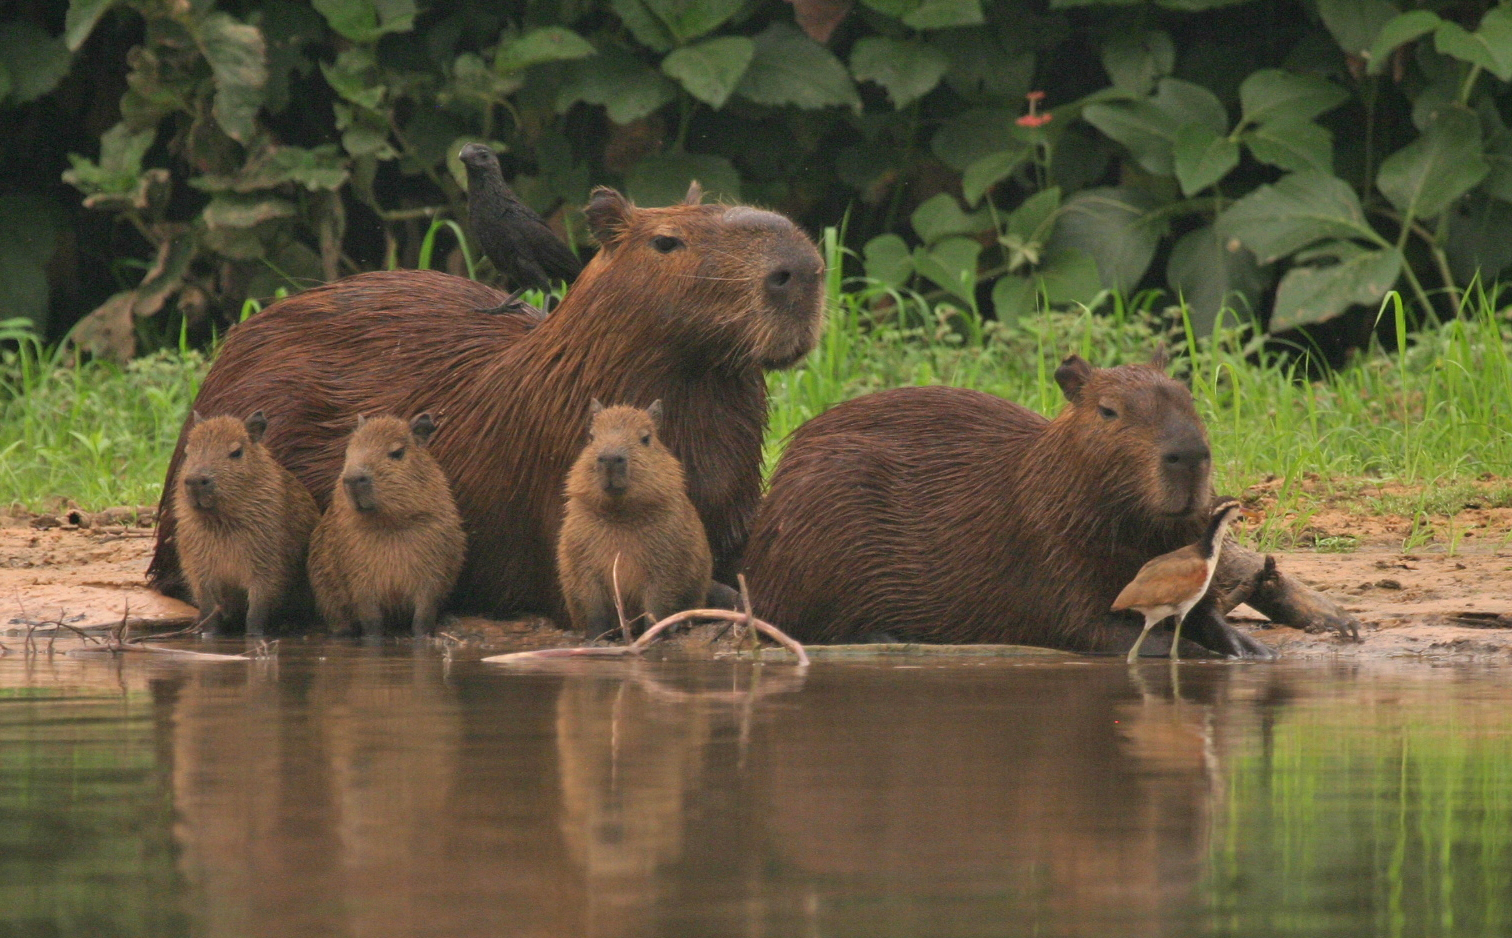 Capybara are among the creatures we see we visit on our Brazil birding and wildlife safaris